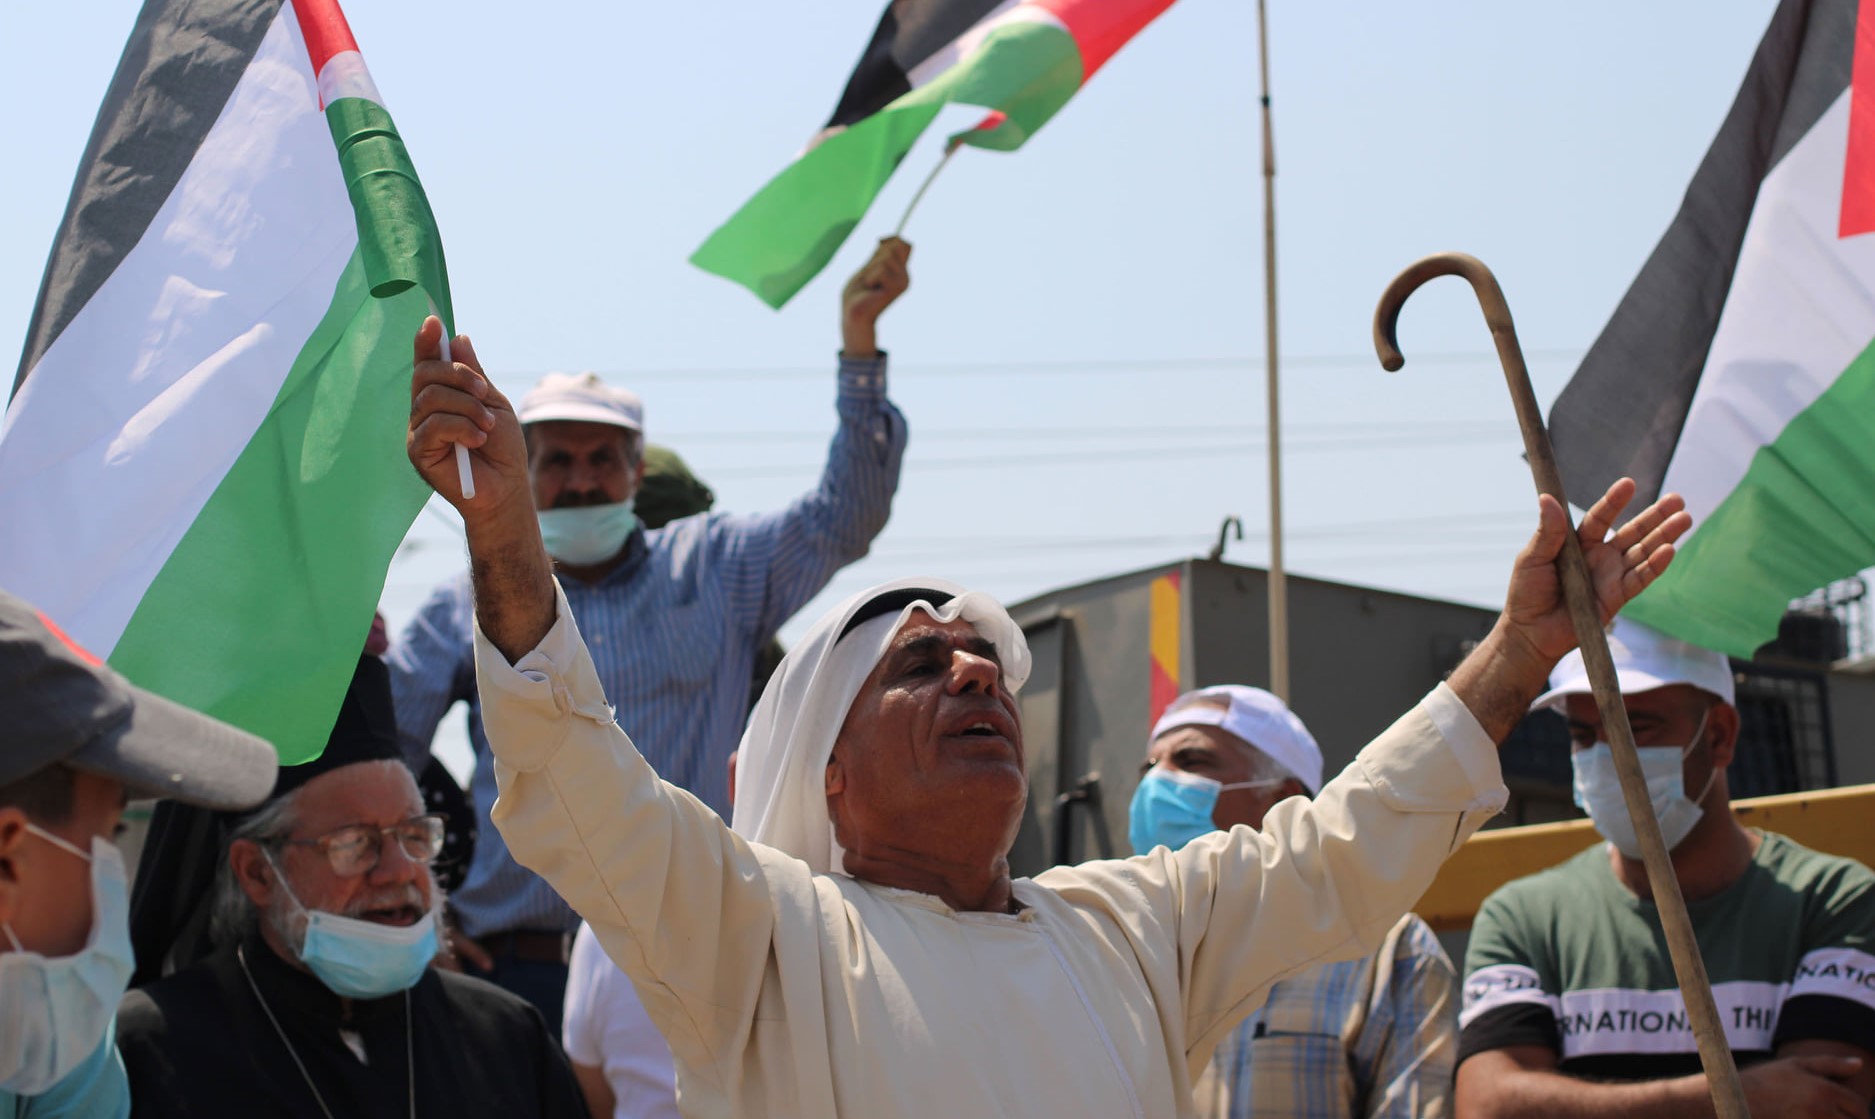 Palestinians protest on September 12 against Israeli occupation and colonization at the entrance to the occupied West Bank village of Hares. Weekly protests have been held in Hares since May, following an incident in which settlers destroyed hundreds of trees on land belonging to residents. Each week, soldiers close the gate to the village, preventing residents from marching to their land.